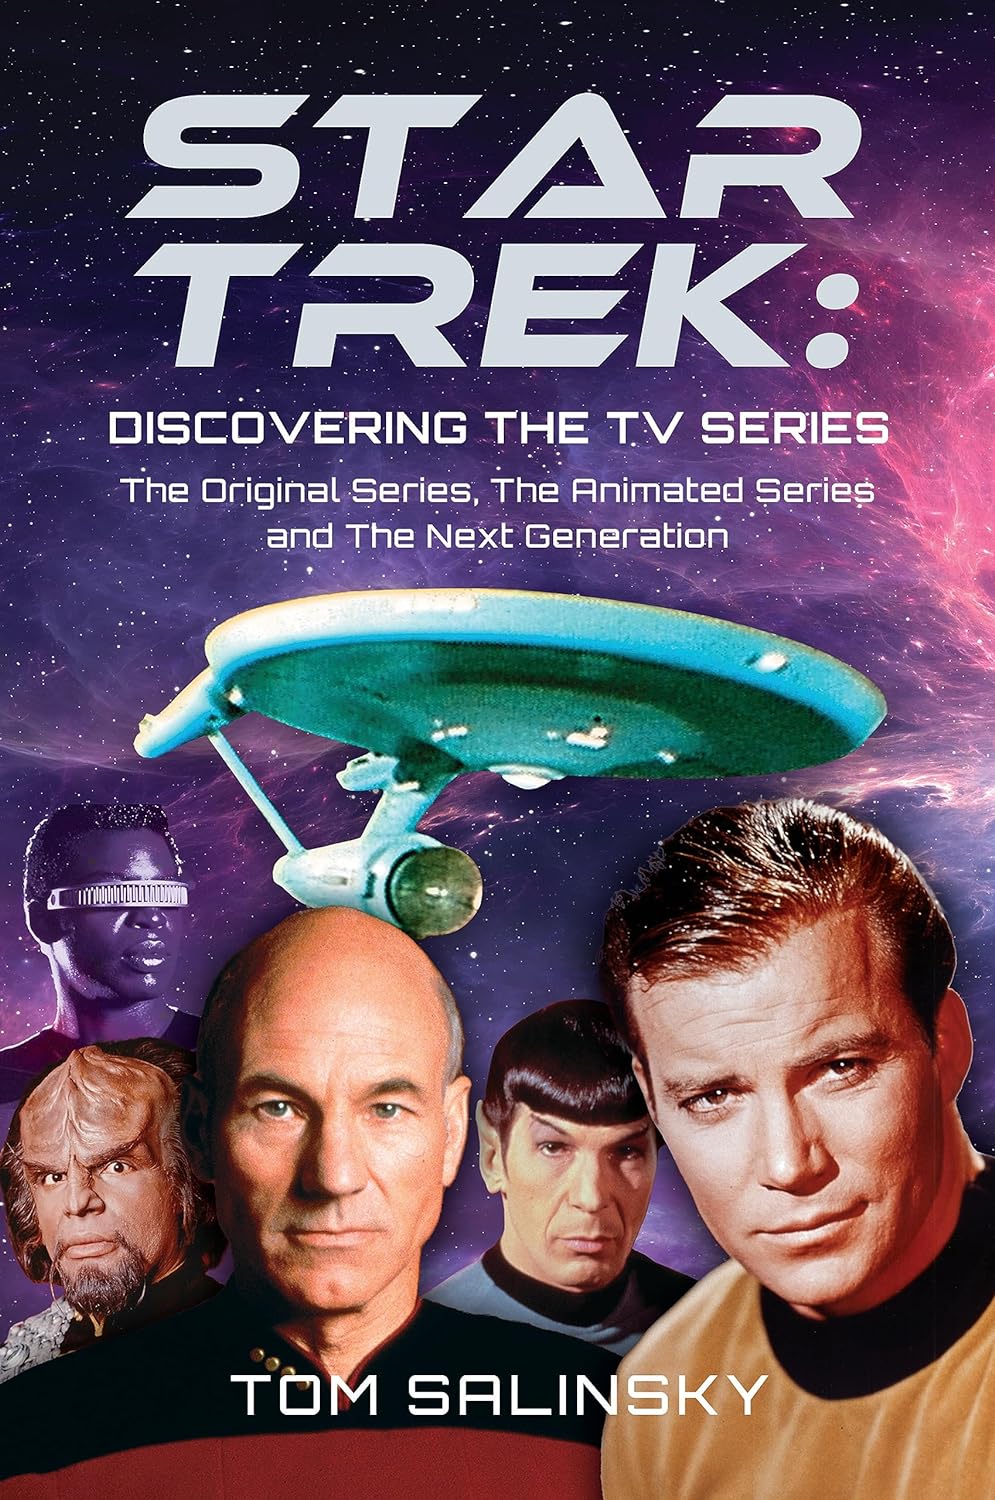 Star_Trek_discovering_the_TV-series_book_cover.